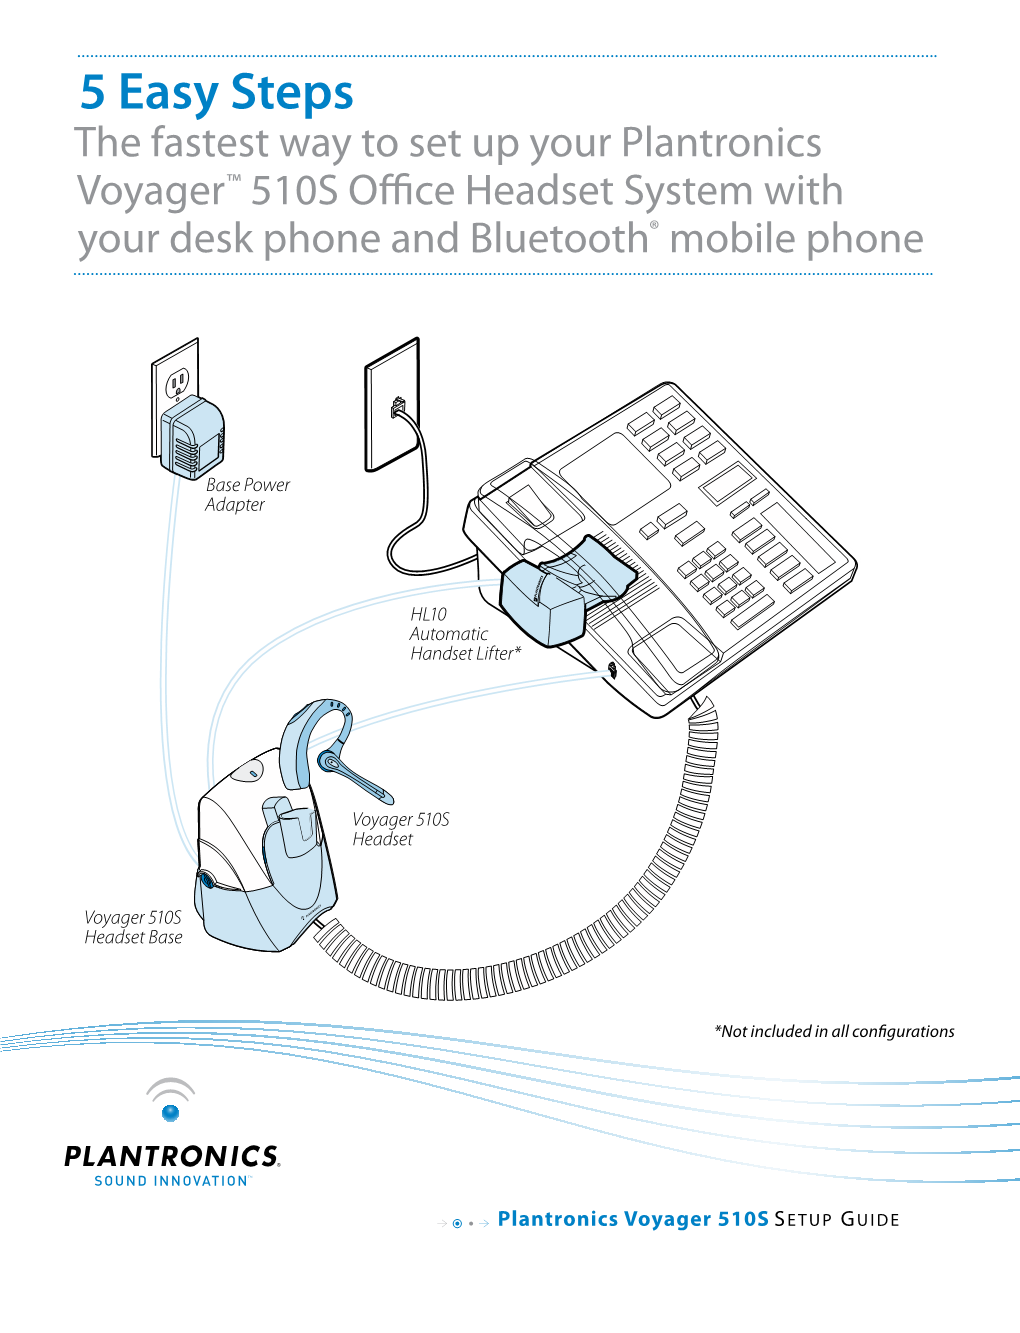 Voyager 510S Setup Guide Install Eartip & Adjust Fit 1STEP Fit the Headset Slide the Headset Over and Behind Your Ear, Then Press Gently Toward Your Ear